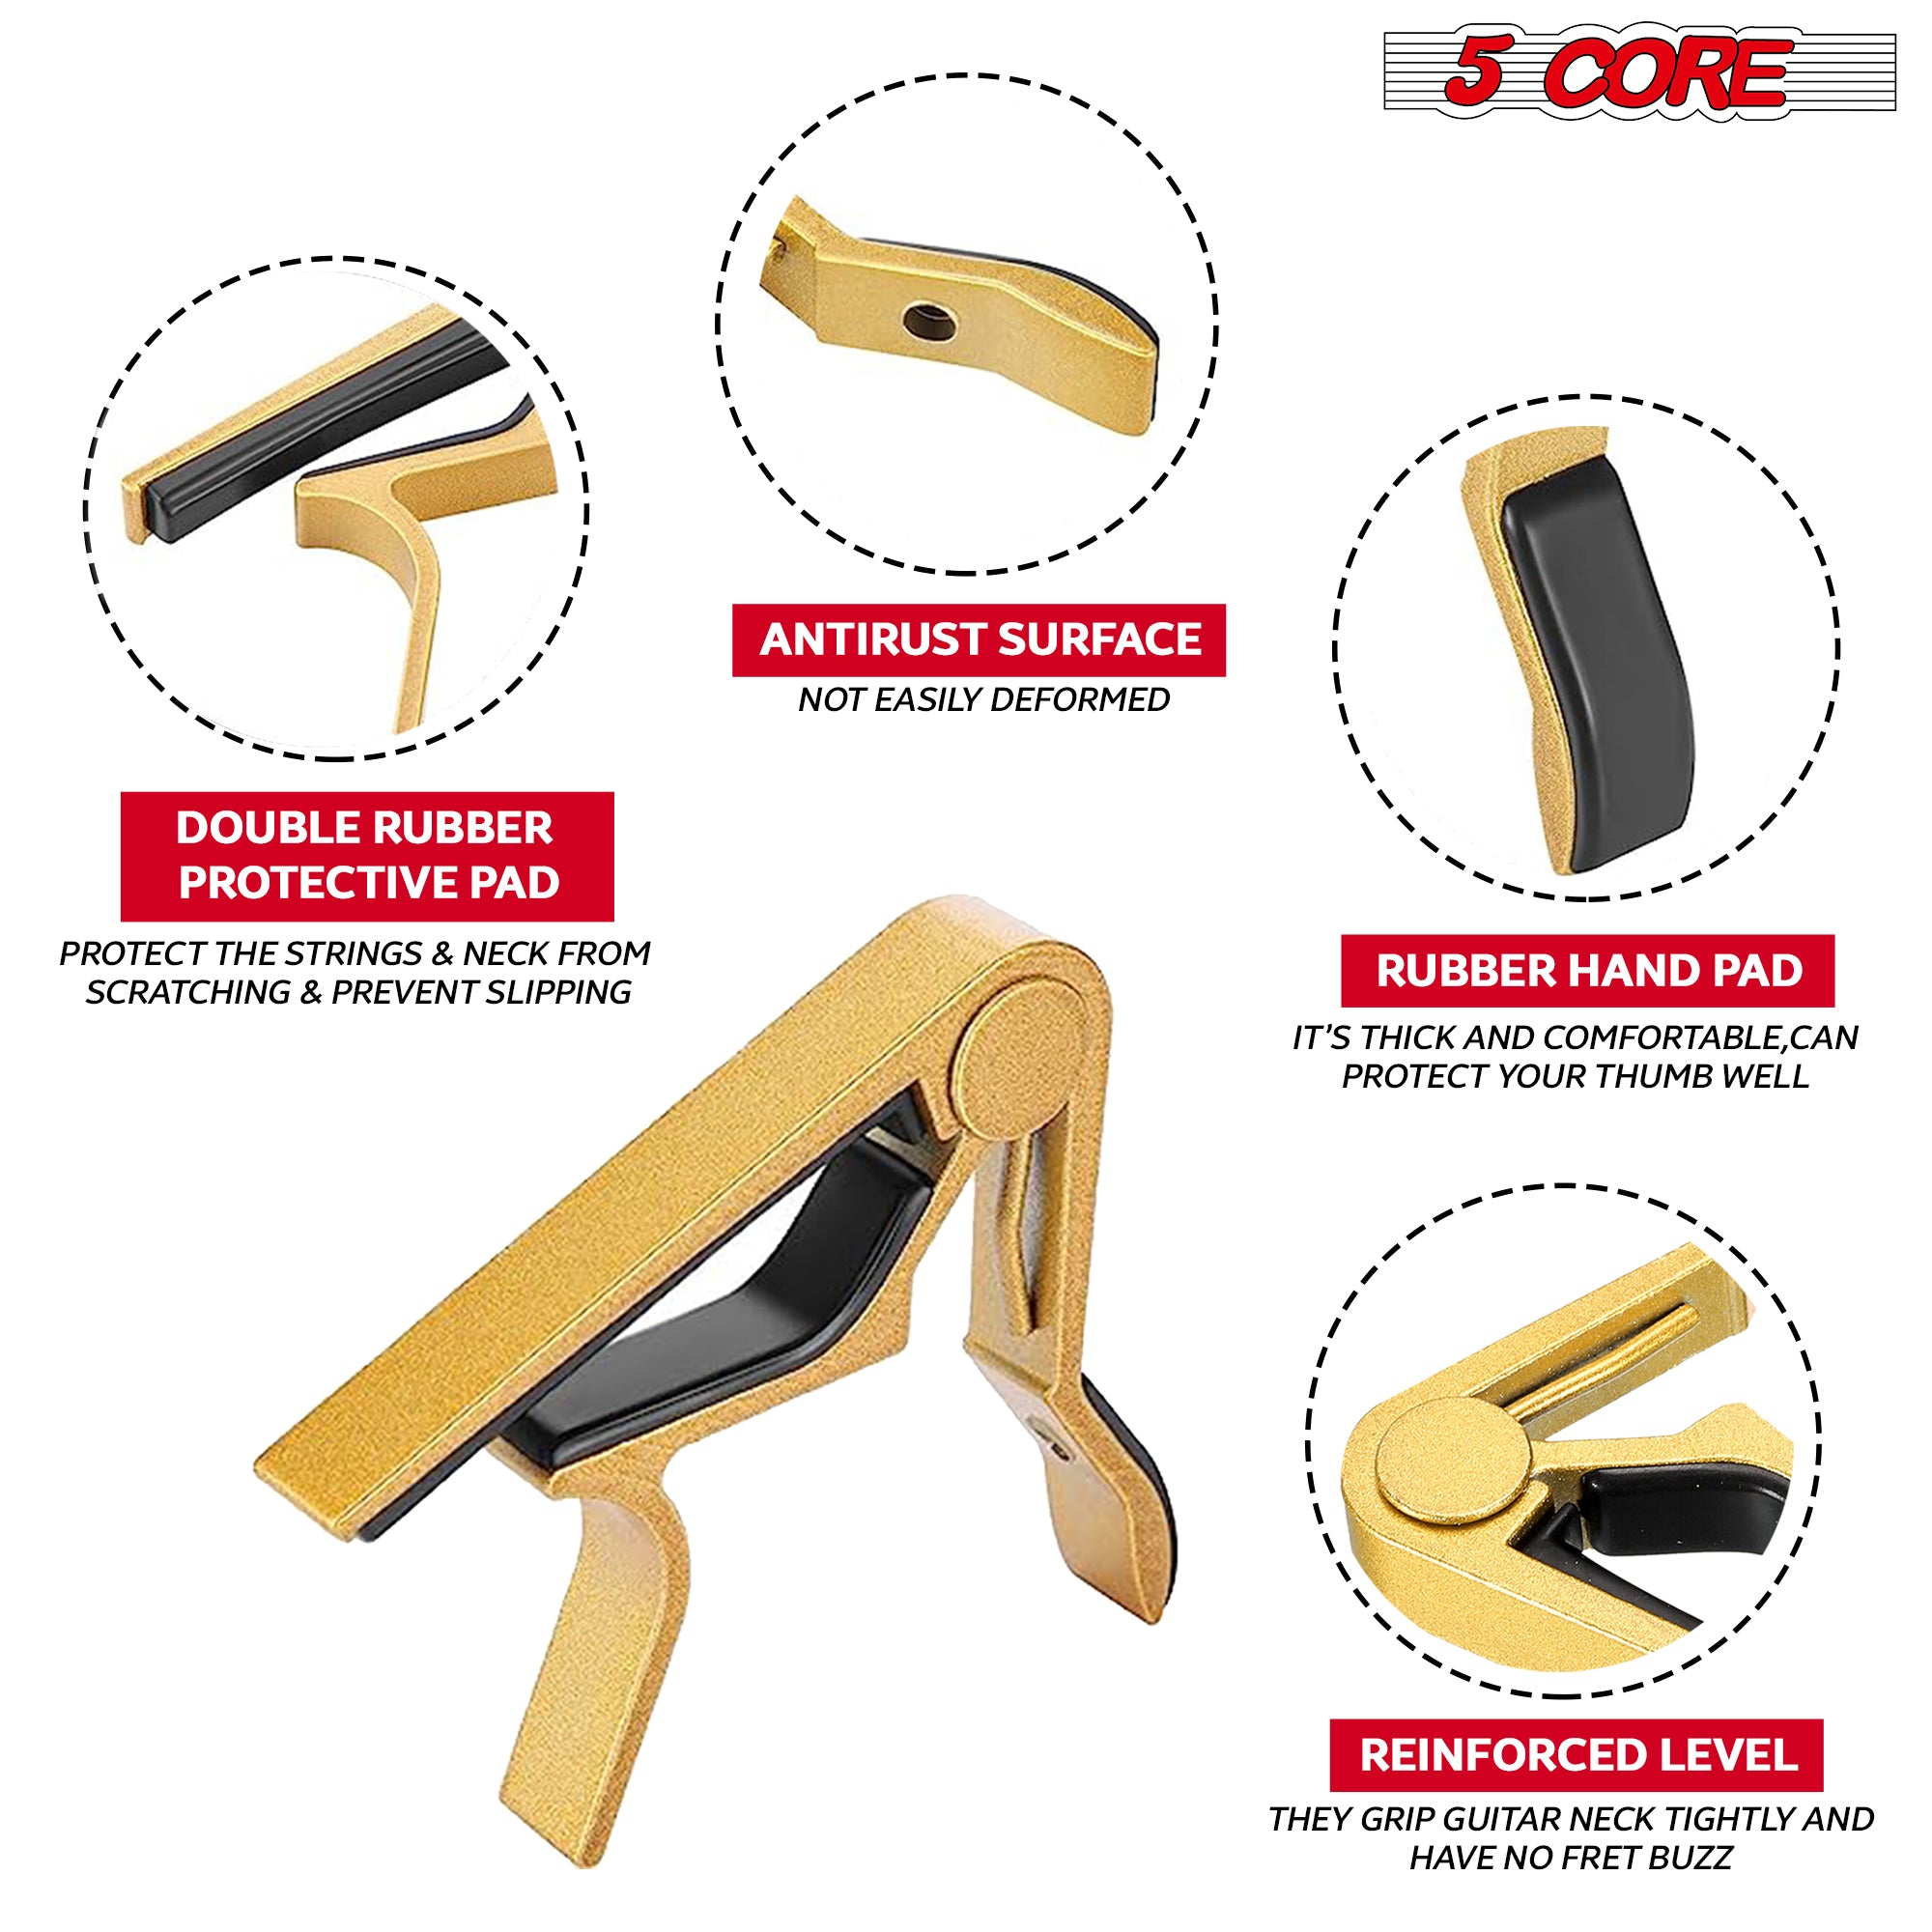 5 Core Guitar Capo 4 Pack 6 String Kapo Universal Clamp w Soft Padding for Acoustic Electric Guitars